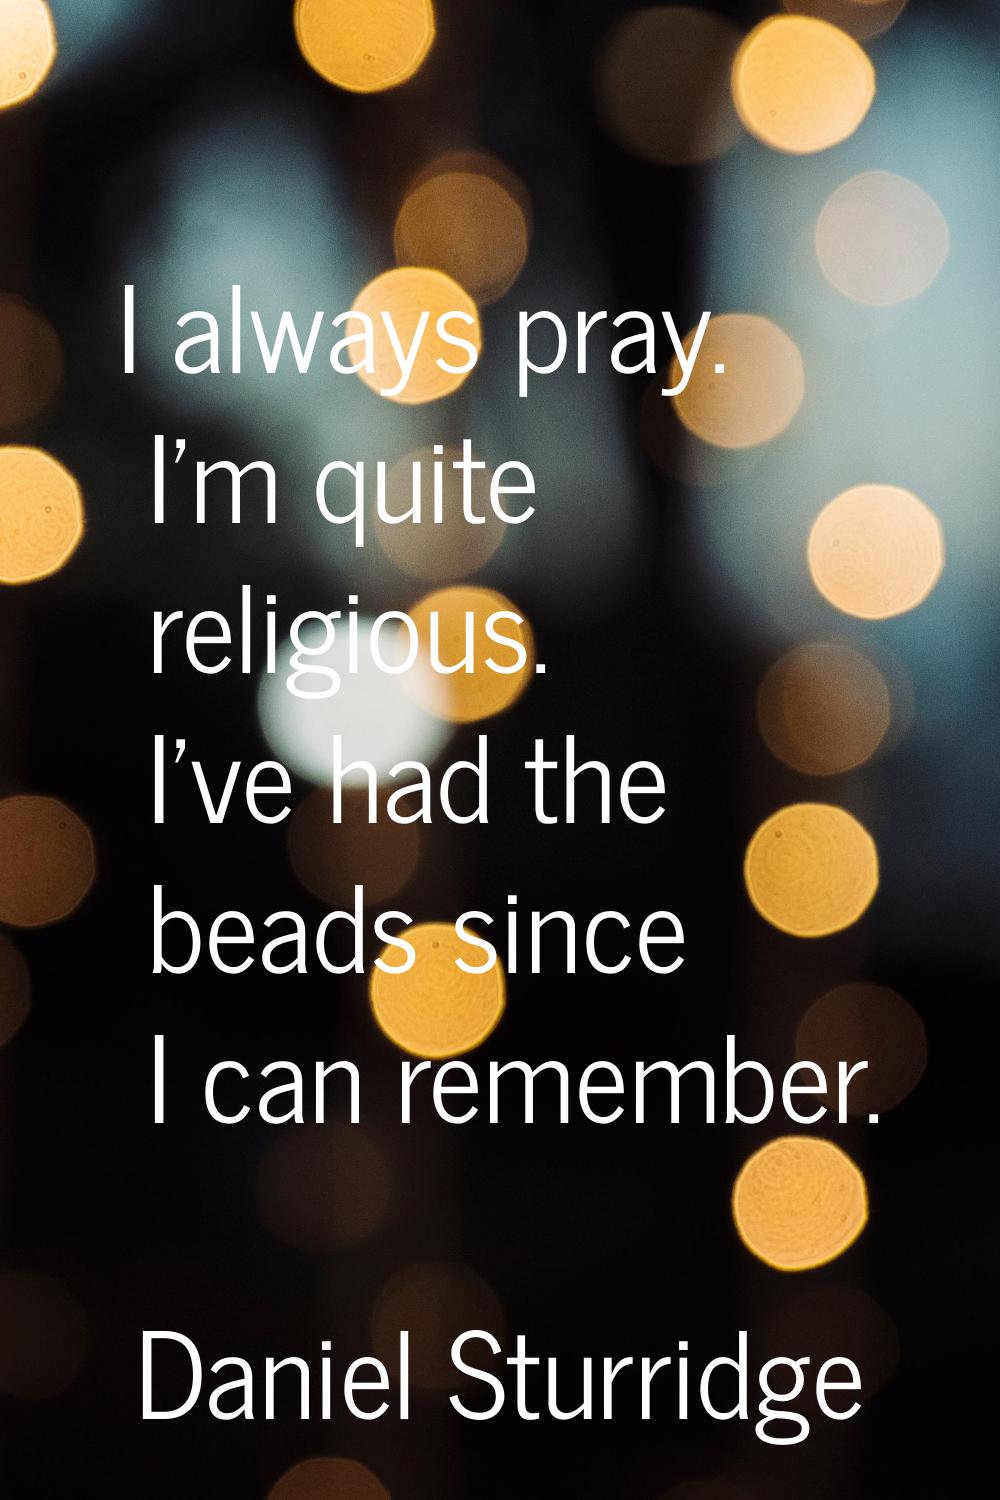 I always pray. I'm quite religious. I've had the beads since I can remember.